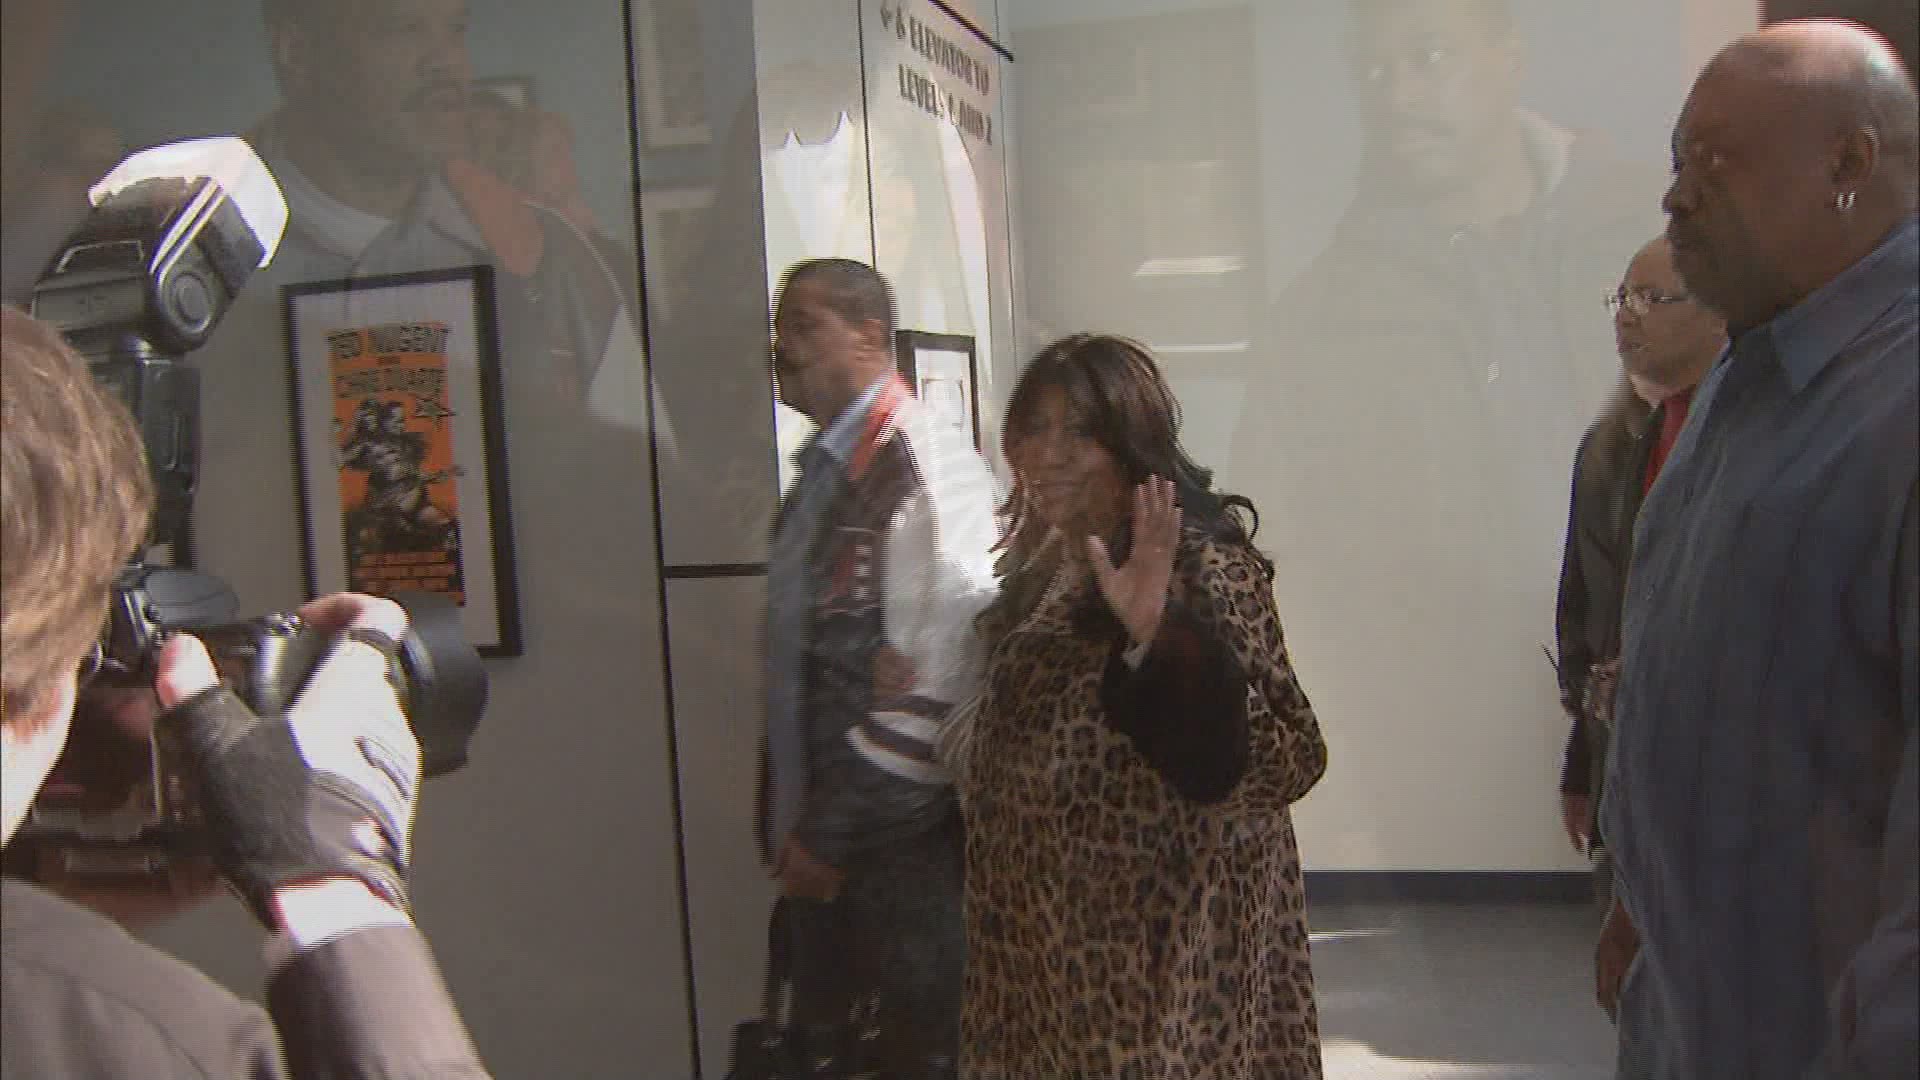 Exclusive video from WKYC shows Aretha Franklin touring the Rock and Roll Hall of Fame in Cleveland back in 2011. She was inducted into the Hall of Fame back in 1987.